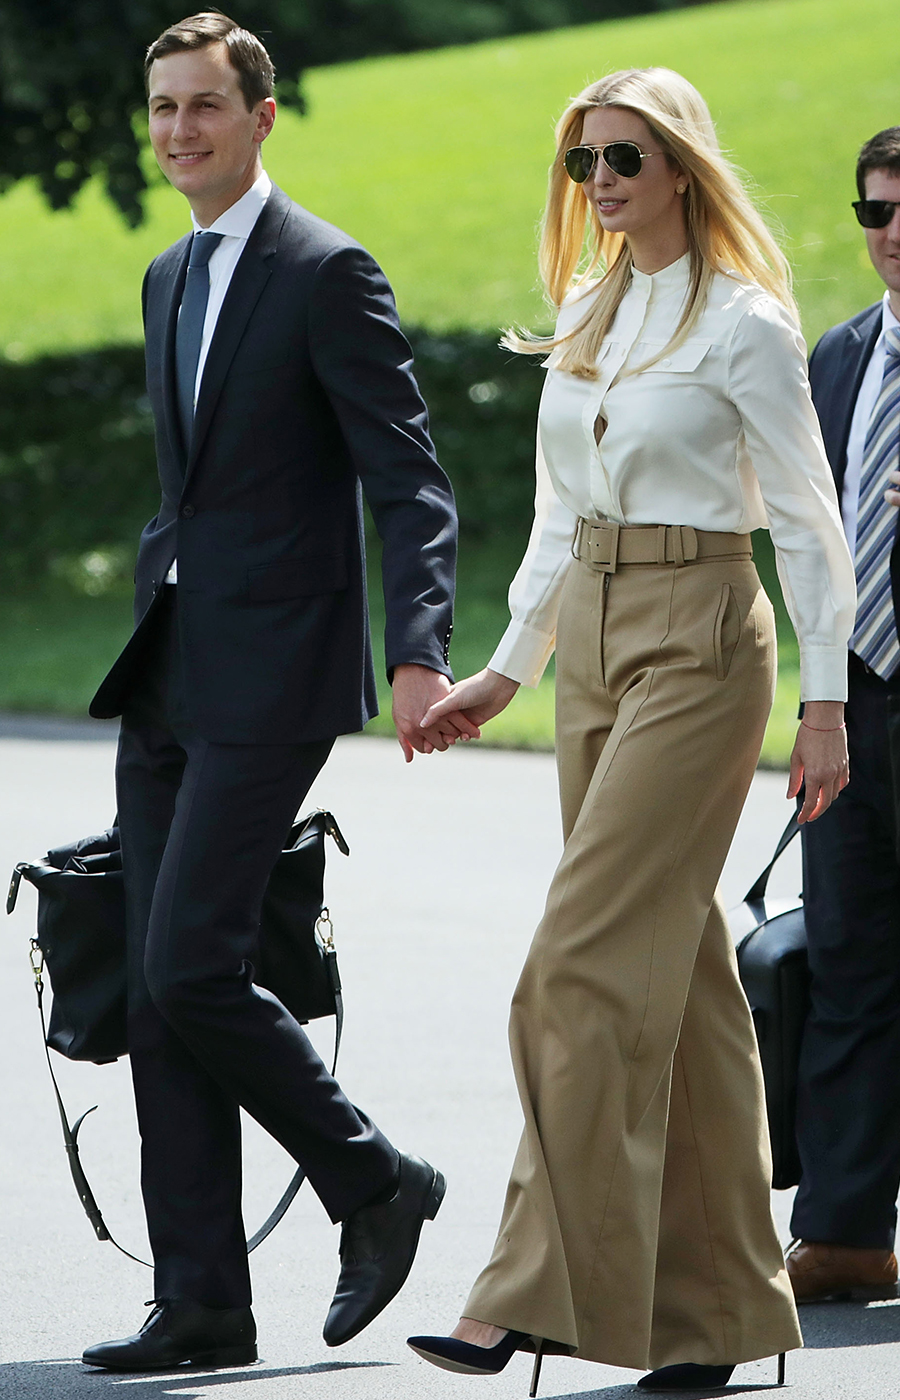 President Trump Departs White House For Camp David